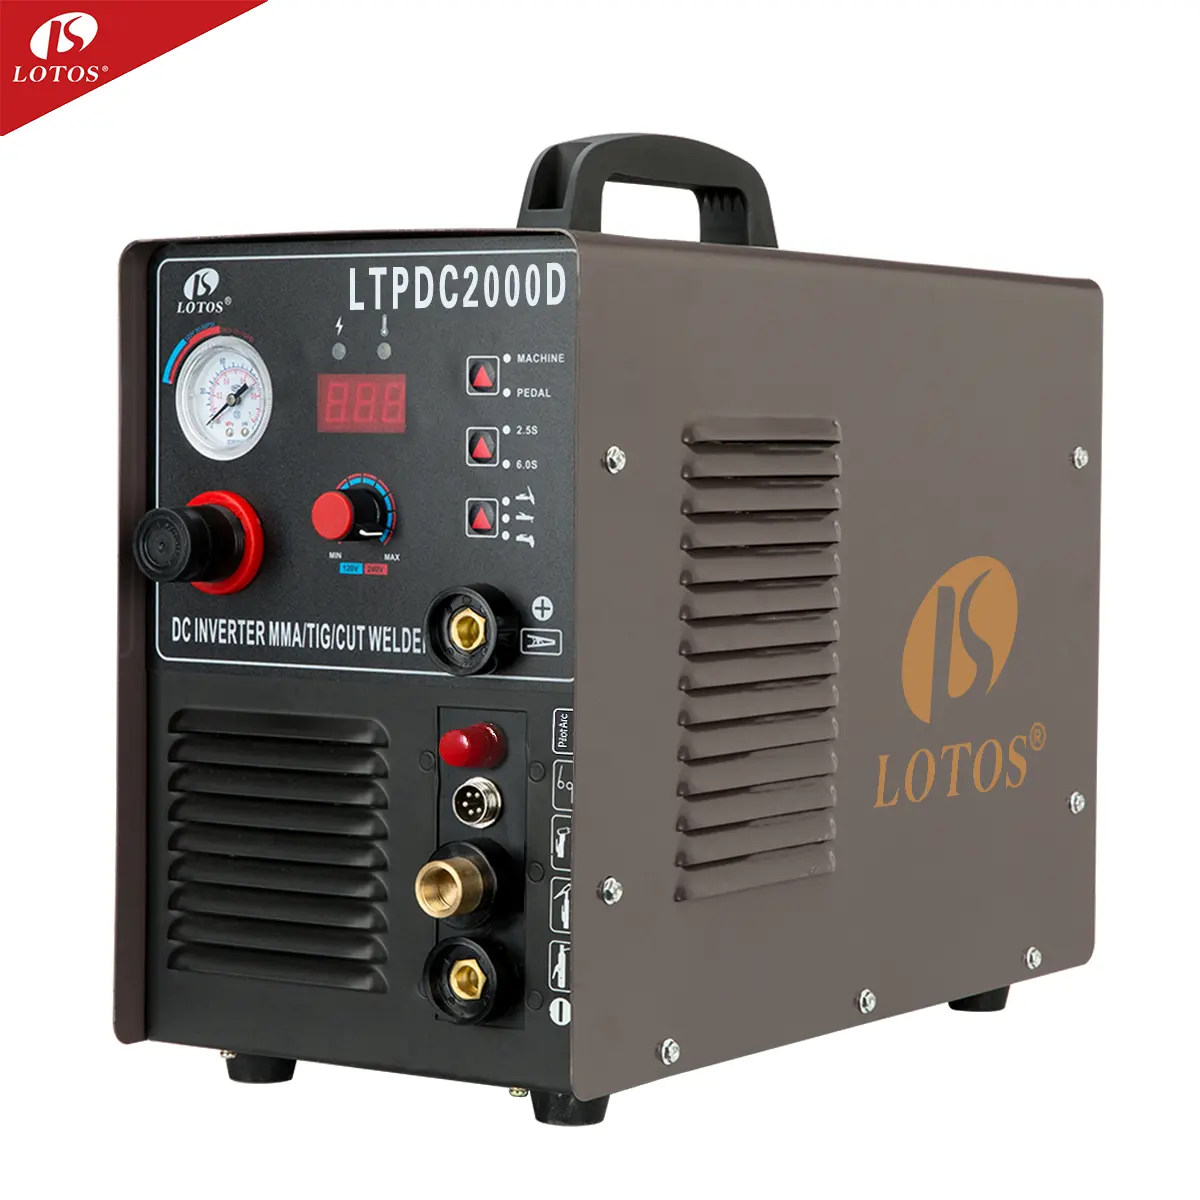 Lotos LTPDC2000D welder and plasma cutter 3 in 1 dc arc inverter stainless steel welding machine for sale factory price